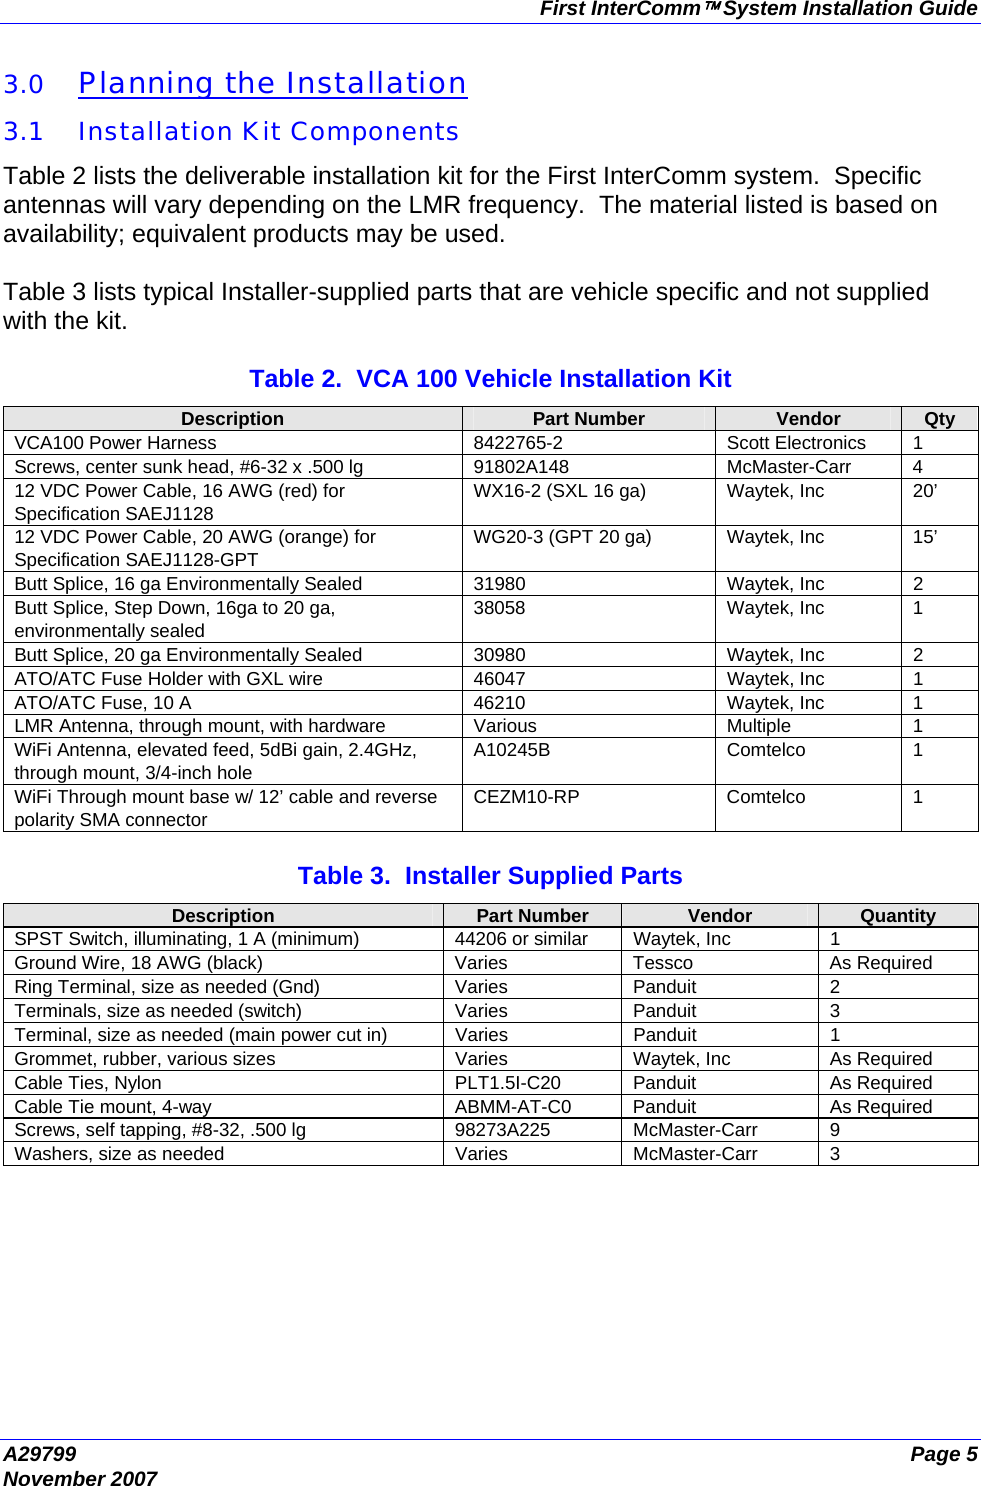 First InterComm™ System Installation Guide A29799  Page 5 November 2007  3.0 Planning the Installation 3.1 Installation Kit Components Table 2 lists the deliverable installation kit for the First InterComm system.  Specific antennas will vary depending on the LMR frequency.  The material listed is based on availability; equivalent products may be used.  Table 3 lists typical Installer-supplied parts that are vehicle specific and not supplied with the kit.  Table 2.  VCA 100 Vehicle Installation Kit Description  Part Number  Vendor  Qty VCA100 Power Harness  8422765-2  Scott Electronics  1 Screws, center sunk head, #6-32 x .500 lg  91802A148  McMaster-Carr  4 12 VDC Power Cable, 16 AWG (red) for Specification SAEJ1128 WX16-2 (SXL 16 ga)  Waytek, Inc  20’ 12 VDC Power Cable, 20 AWG (orange) for Specification SAEJ1128-GPT WG20-3 (GPT 20 ga)  Waytek, Inc  15’ Butt Splice, 16 ga Environmentally Sealed  31980  Waytek, Inc  2 Butt Splice, Step Down, 16ga to 20 ga, environmentally sealed 38058 Waytek, Inc 1 Butt Splice, 20 ga Environmentally Sealed  30980  Waytek, Inc  2 ATO/ATC Fuse Holder with GXL wire  46047  Waytek, Inc  1 ATO/ATC Fuse, 10 A   46210  Waytek, Inc  1 LMR Antenna, through mount, with hardware  Various  Multiple  1 WiFi Antenna, elevated feed, 5dBi gain, 2.4GHz, through mount, 3/4-inch hole A10245B Comtelco 1 WiFi Through mount base w/ 12’ cable and reverse polarity SMA connector CEZM10-RP Comtelco 1  Table 3.  Installer Supplied Parts Description  Part Number  Vendor  Quantity SPST Switch, illuminating, 1 A (minimum)  44206 or similar  Waytek, Inc  1 Ground Wire, 18 AWG (black)  Varies  Tessco  As Required Ring Terminal, size as needed (Gnd)  Varies  Panduit  2 Terminals, size as needed (switch)  Varies  Panduit  3 Terminal, size as needed (main power cut in)  Varies  Panduit  1 Grommet, rubber, various sizes  Varies  Waytek, Inc  As Required Cable Ties, Nylon  PLT1.5I-C20  Panduit  As Required Cable Tie mount, 4-way  ABMM-AT-C0  Panduit  As Required Screws, self tapping, #8-32, .500 lg  98273A225  McMaster-Carr  9 Washers, size as needed  Varies  McMaster-Carr  3 